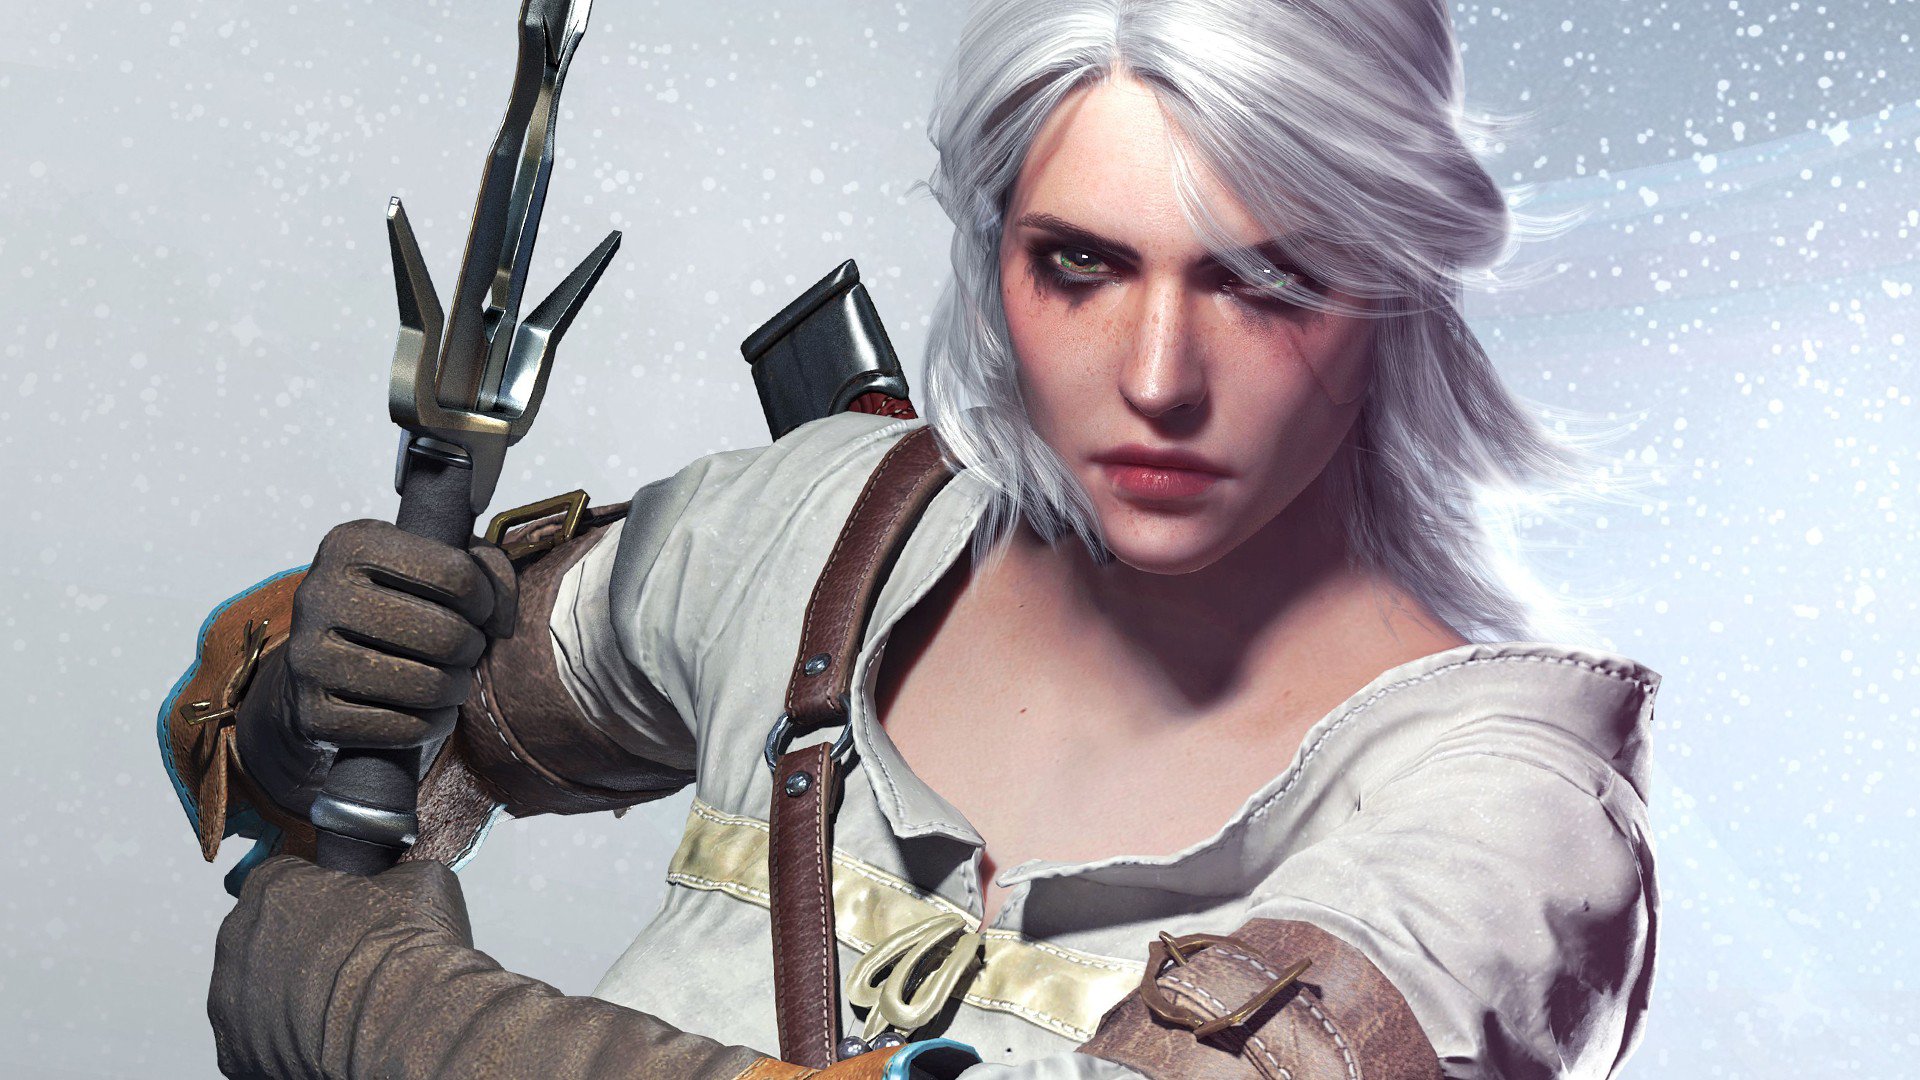 ciri wallpaper,cg artwork,fictional character,massively multiplayer online role playing game